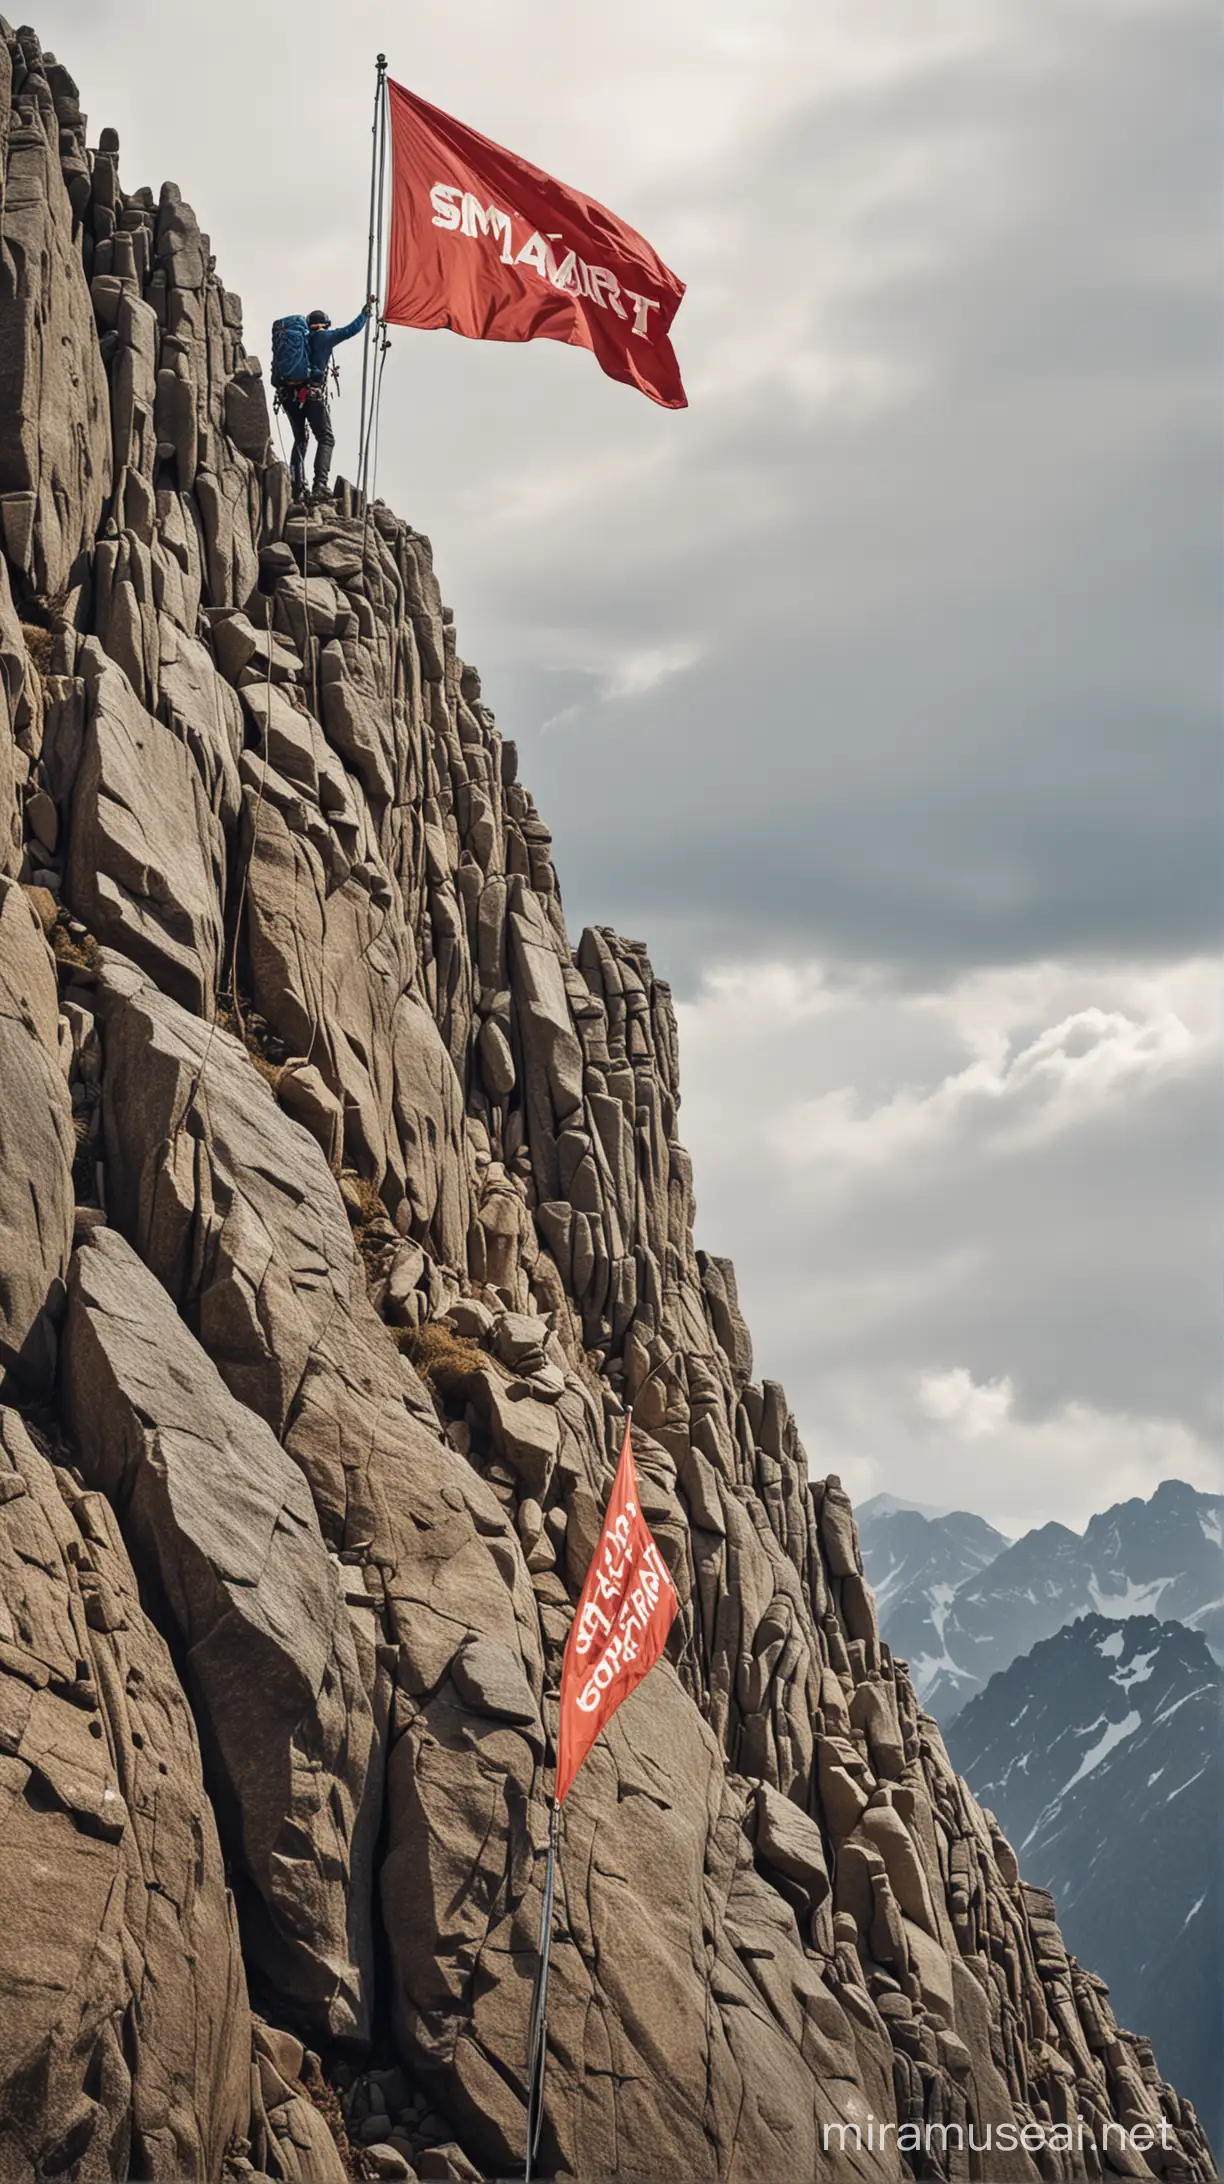 An image of a climber ascending a mountain, facing obstacles but continuing to climb, with a flag at the summit symbolizing their goal with the word SMART on the flag. Show the climber in the middle of the hill and at the top.